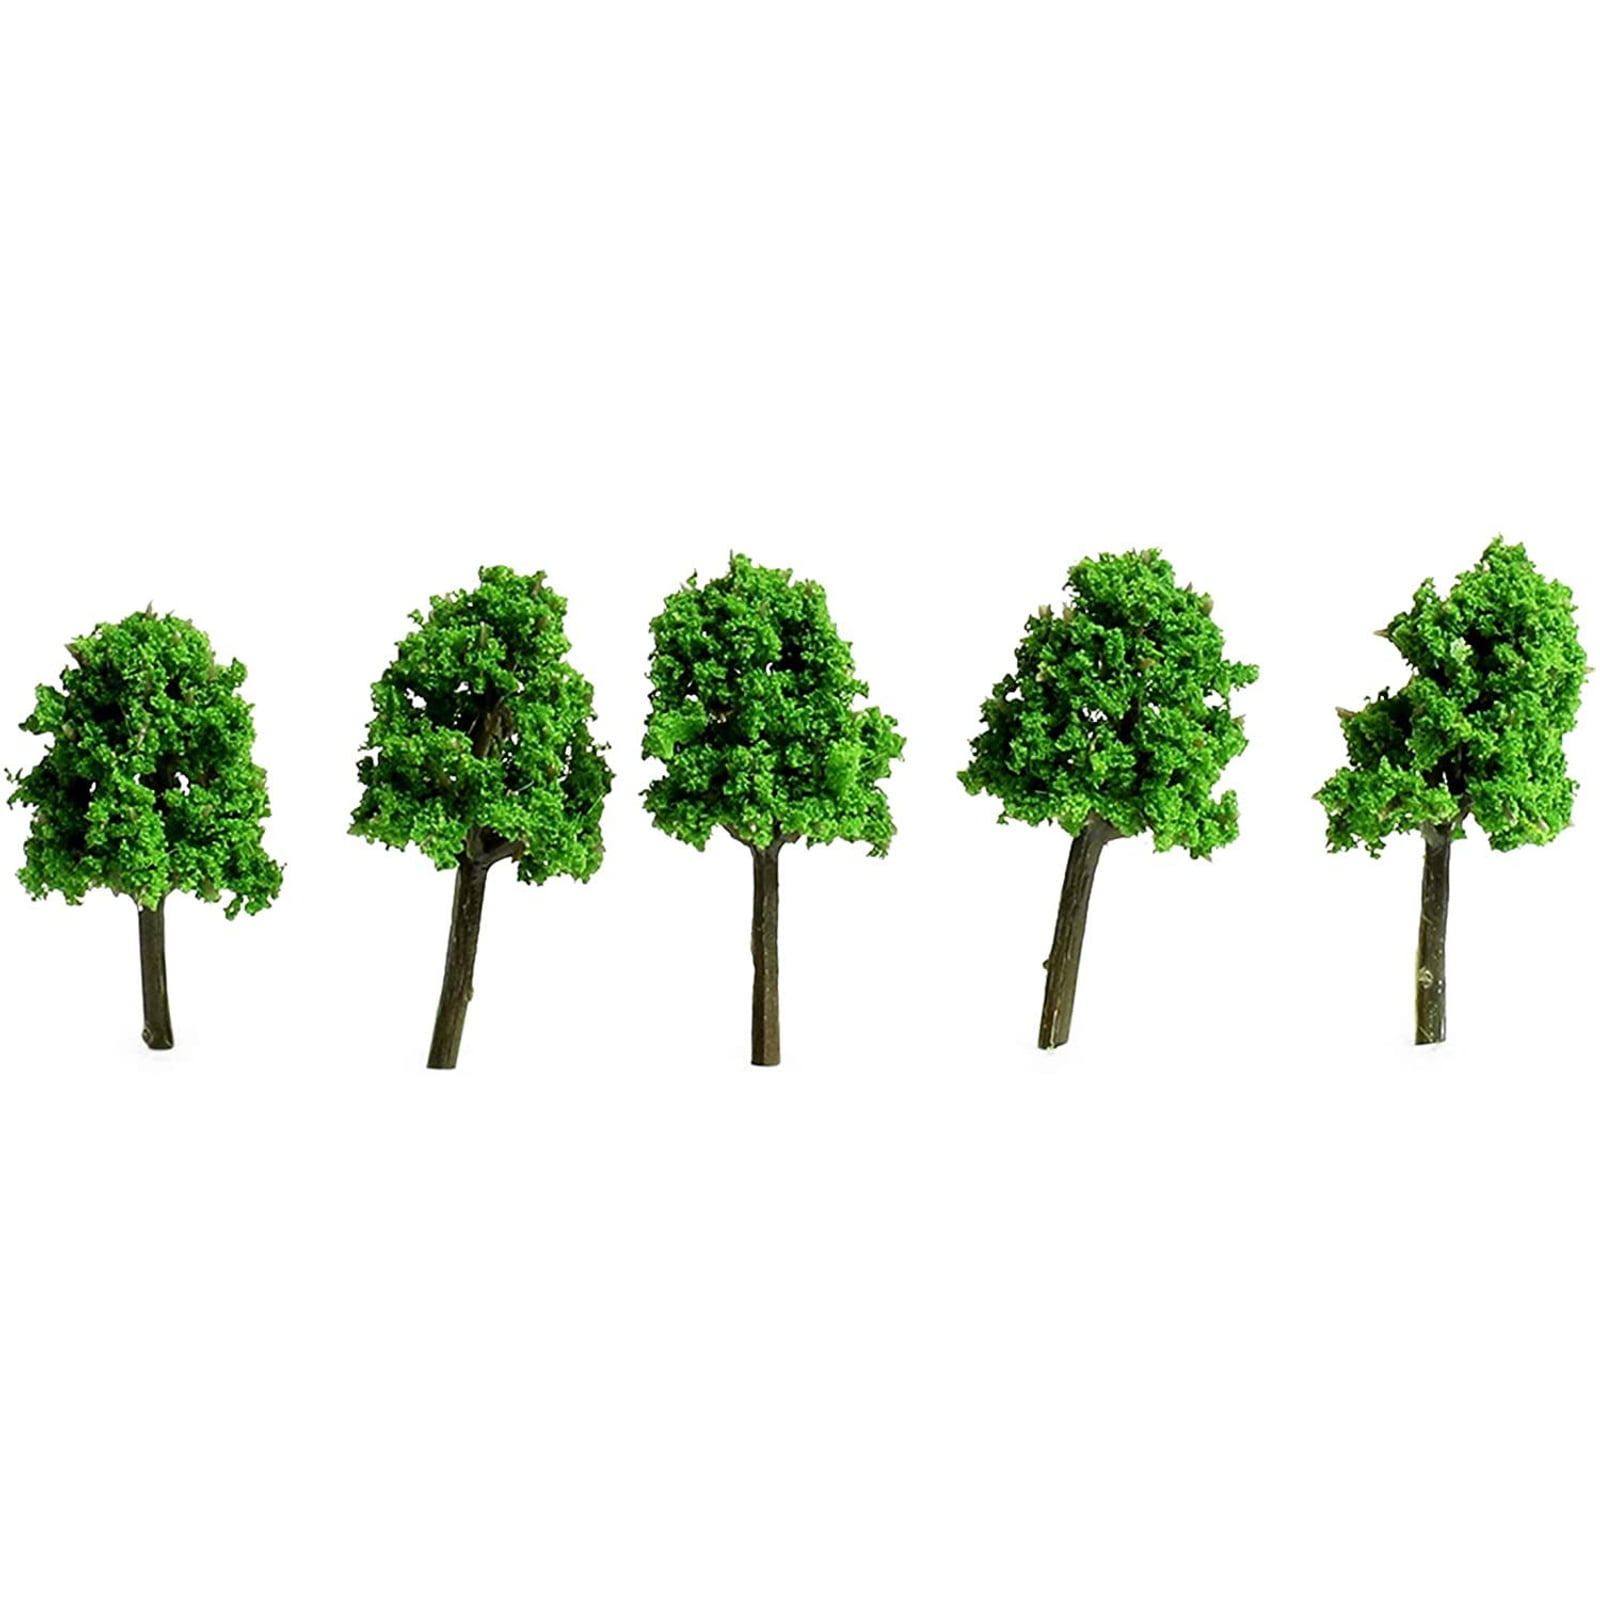 LUEYAO Mini Model Miniature Trees Mixed Train Scenery Architecture Trees Fake Trees for DIY Crafts Building Model Scenery Landscape Green 1.2-3.9 inch 20 PCS 